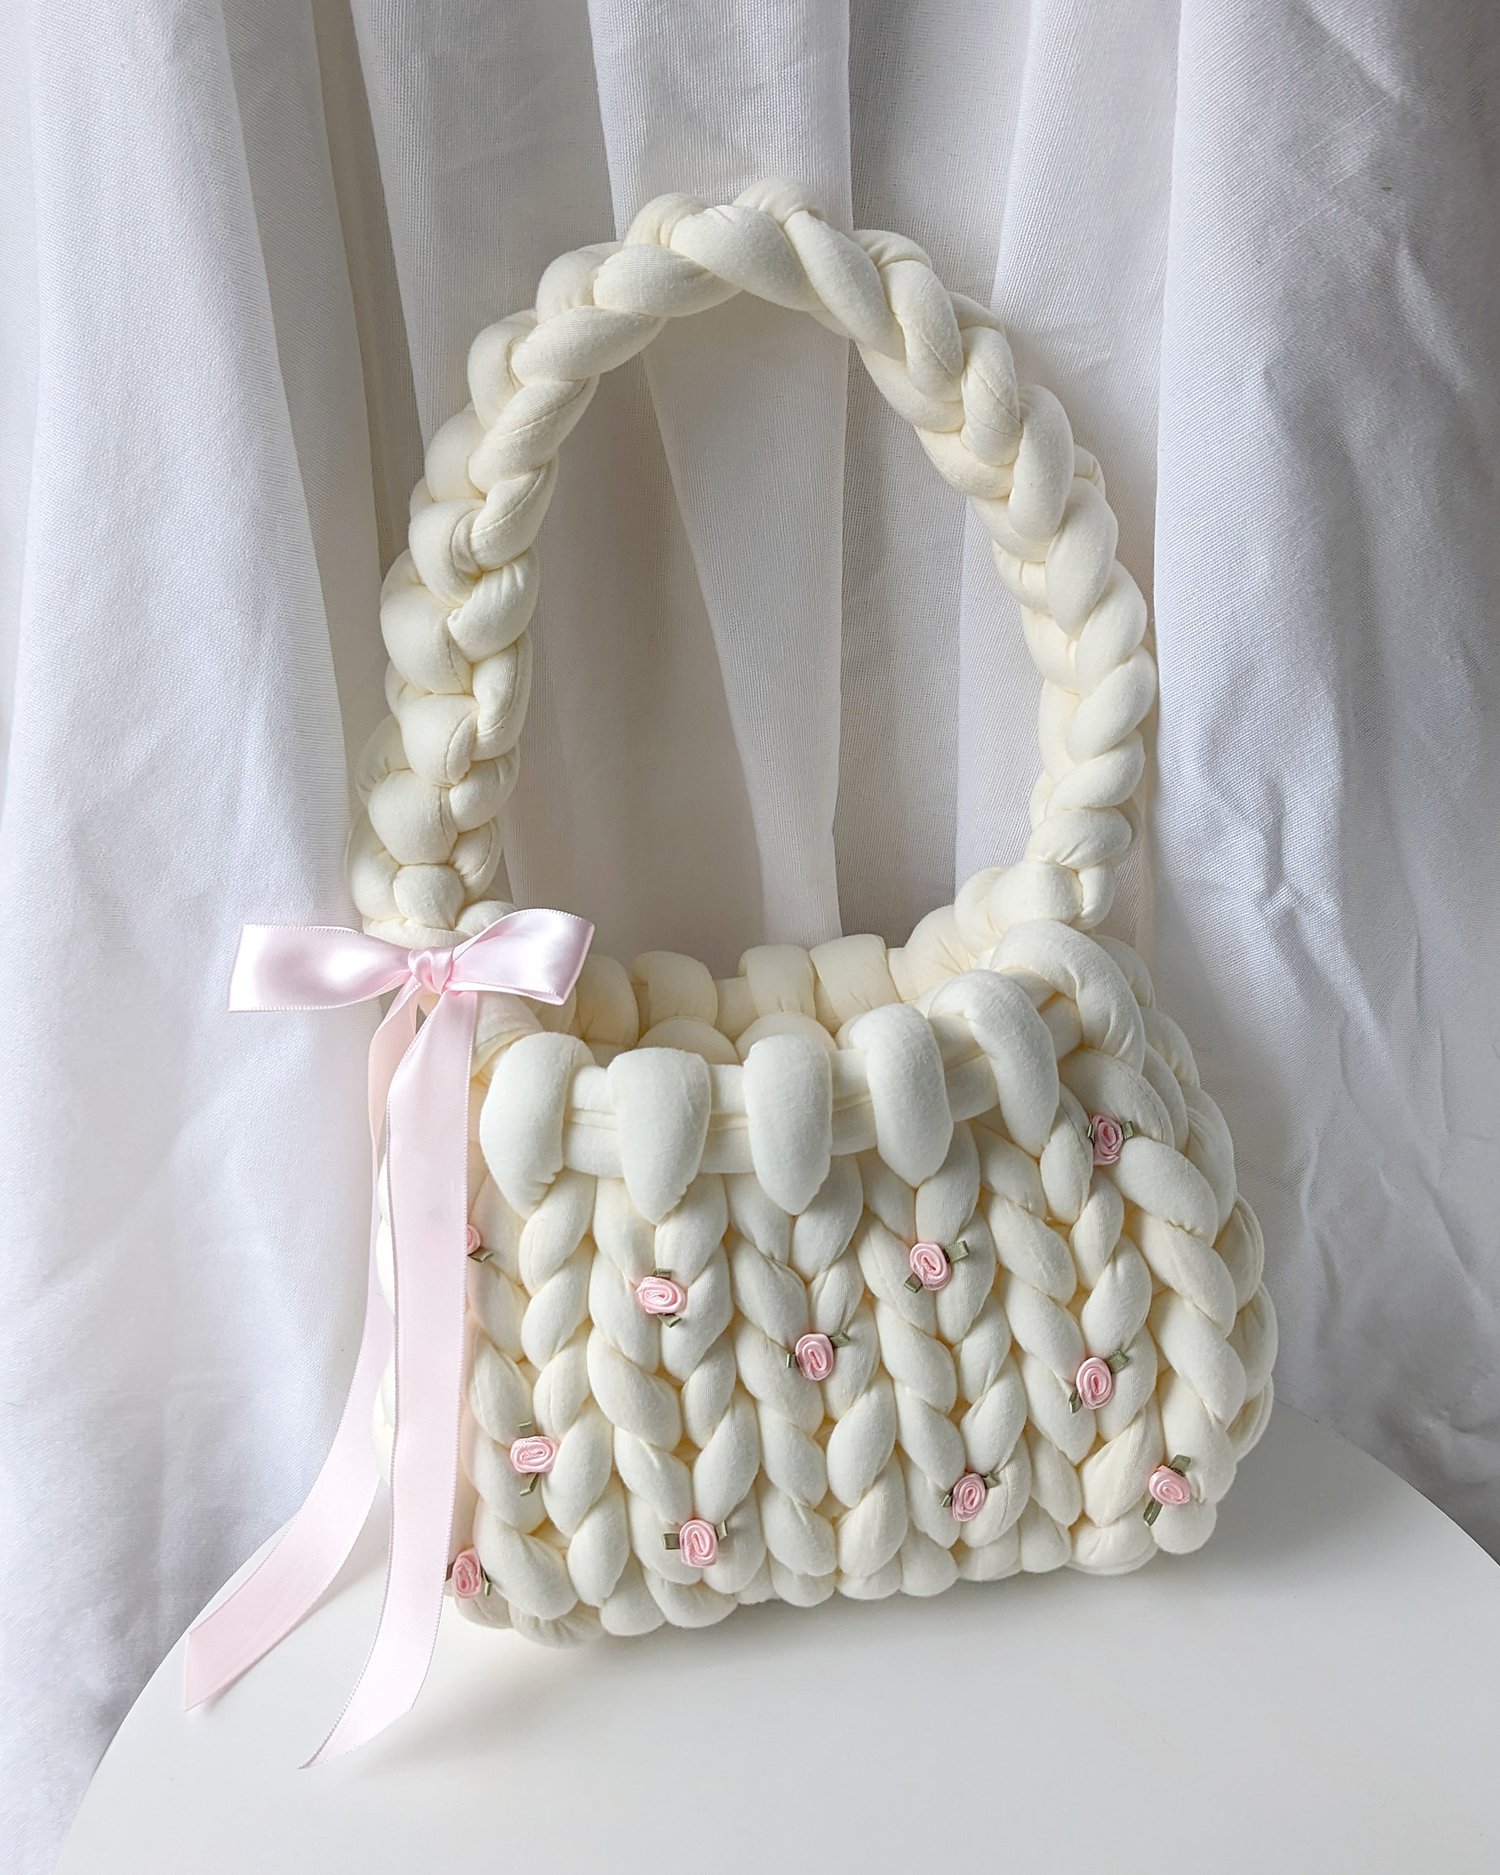 https://withchelle.com/shop/rosey-chunky-knit-bag